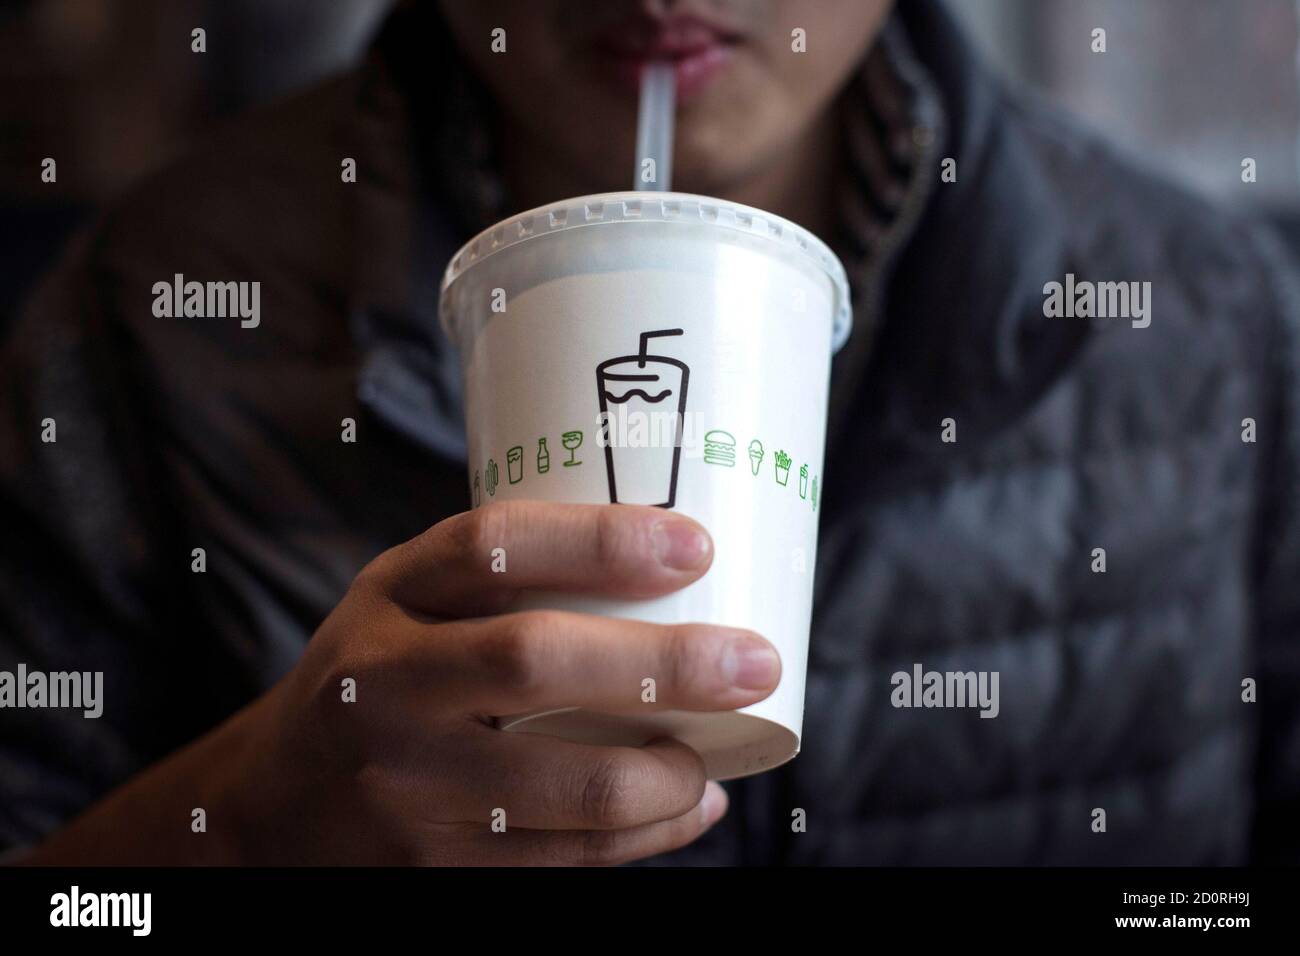 A man drinks a shake at Shake Shack in New York January 30, 2015. Shares of trendy hamburger chain Shake Shack Inc soared as much as 150 percent in their first day of trading on Friday, valuing the company that grew out of a hotdog cart in New York's Madison Square Park at nearly $2 billion. REUTERS/Andrew Kelly (UNITED STATES - Tags: BUSINESS FOOD) Stock Photo